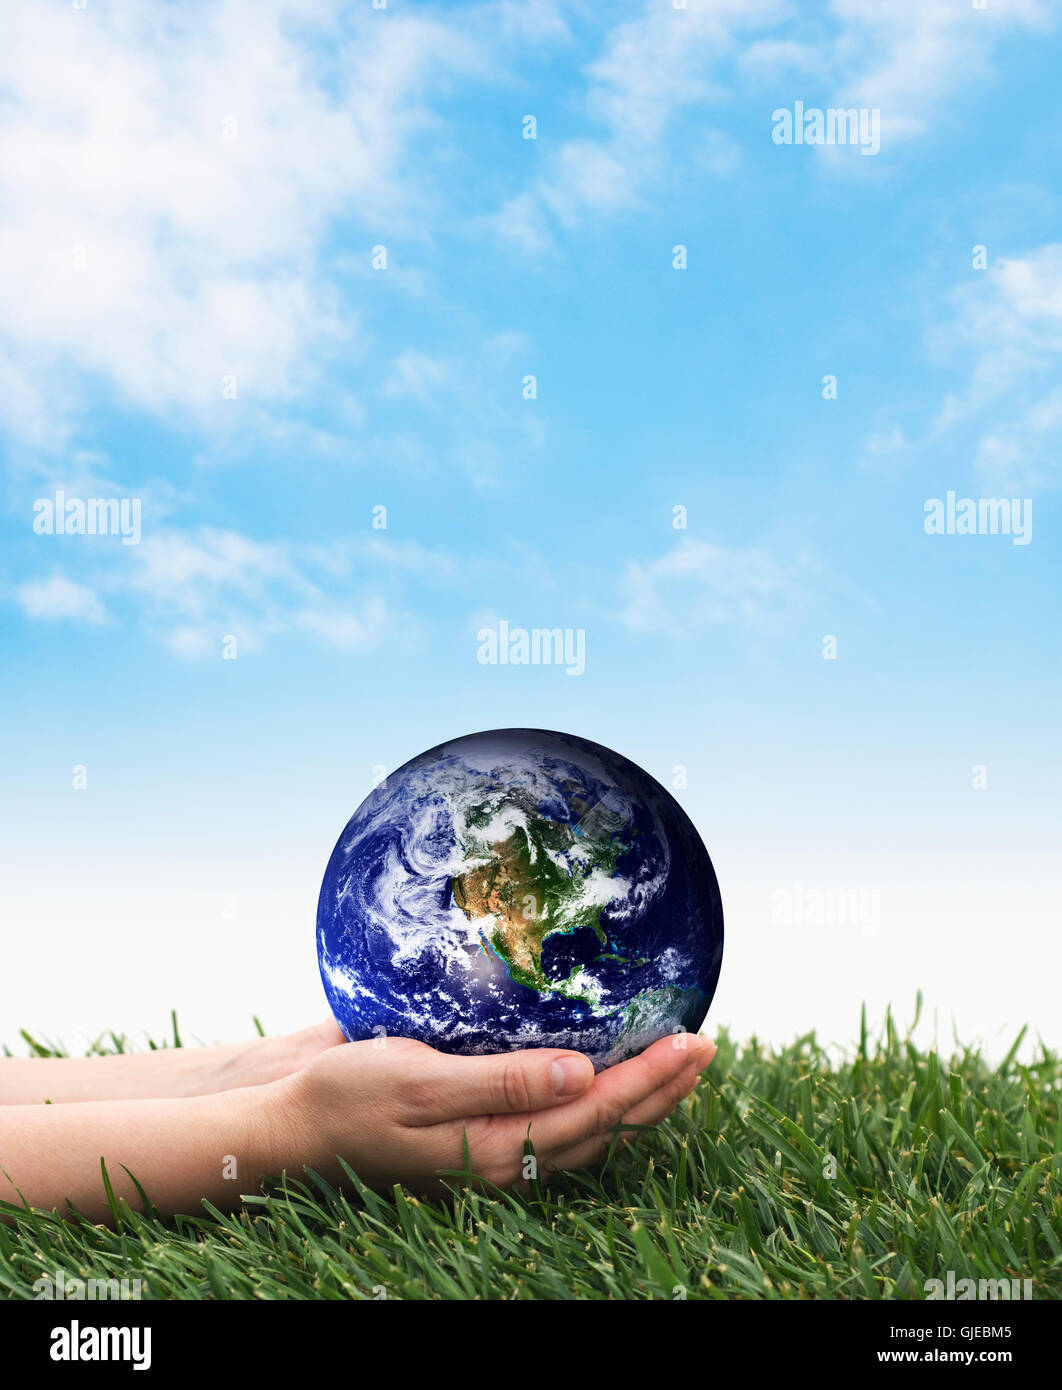 Hands holding earth over grass on a blue sky.  The planet earth image provided by NASA  http://www.earthobservatory.nasa.gov Stock Photo